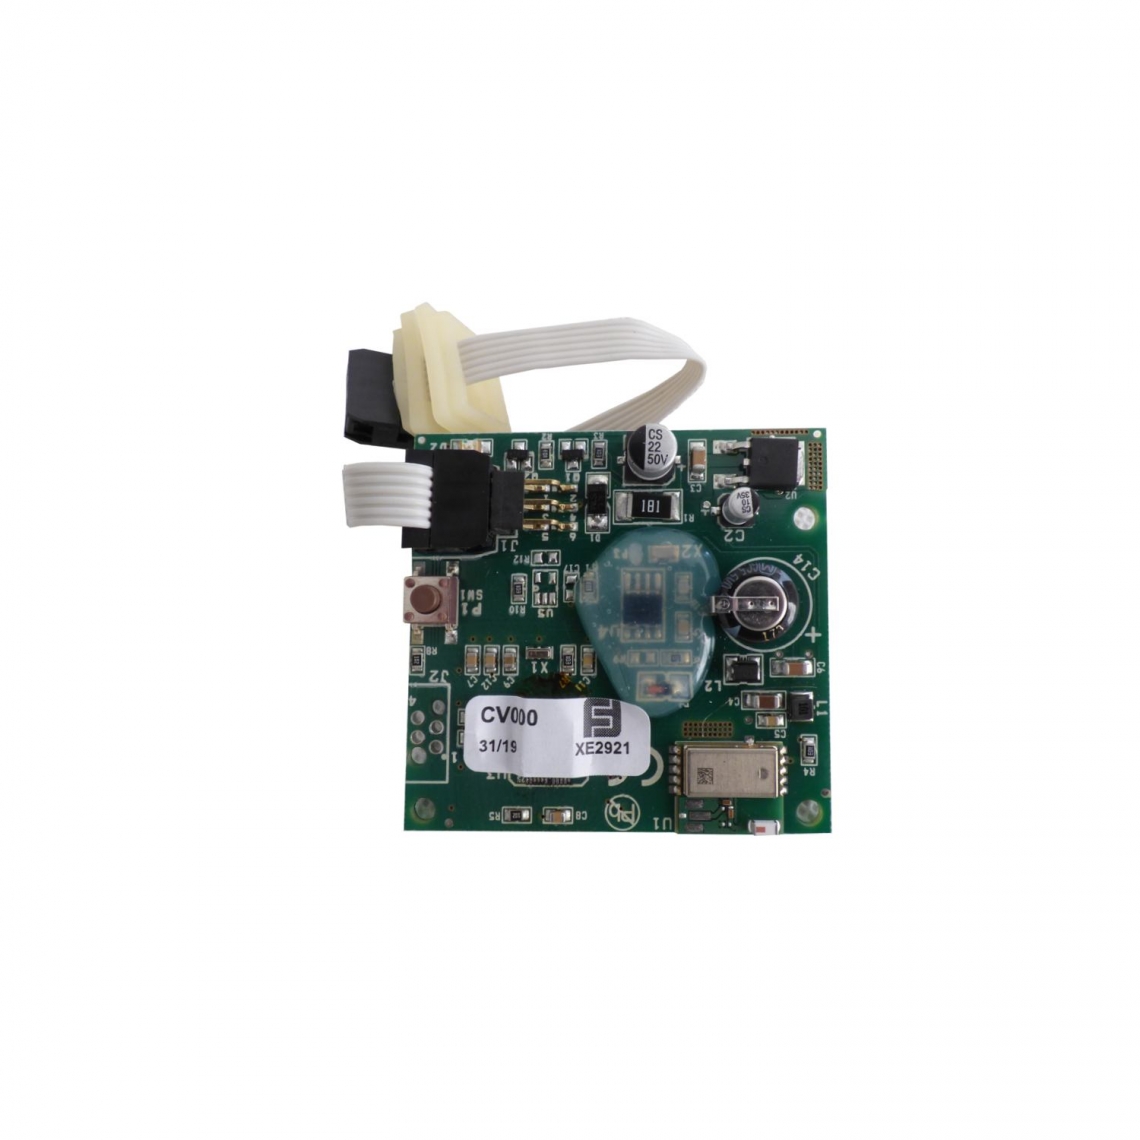 XE2921 - Alba board for Bluetooth technology